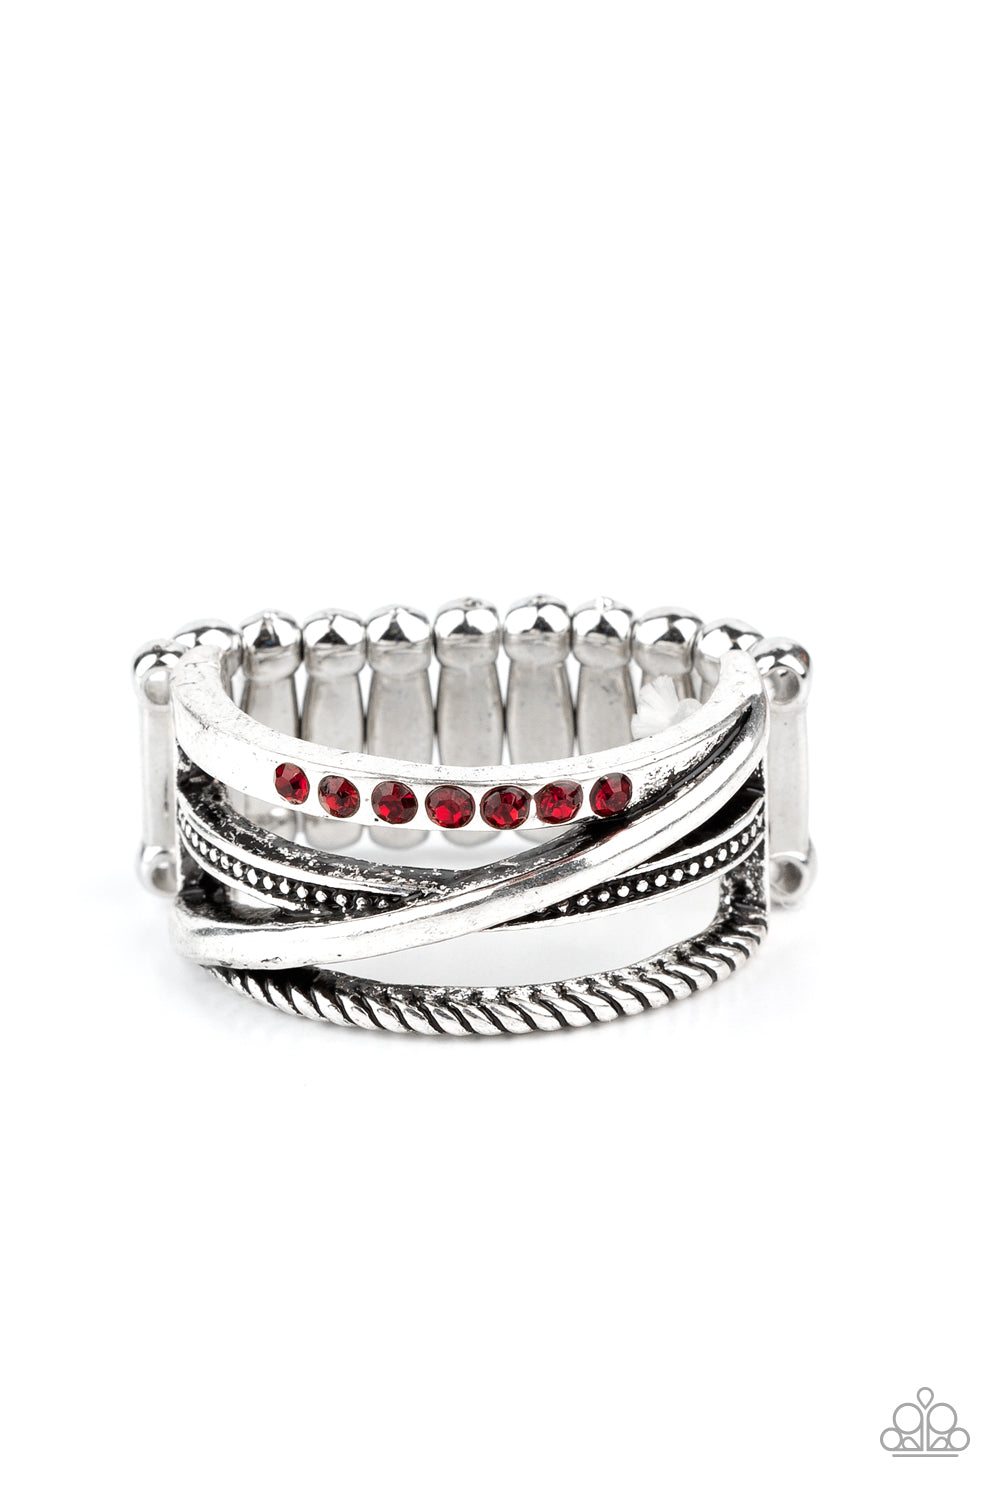 Stay In Your Lane - red - Paparazzi ring – JewelryBlingThing